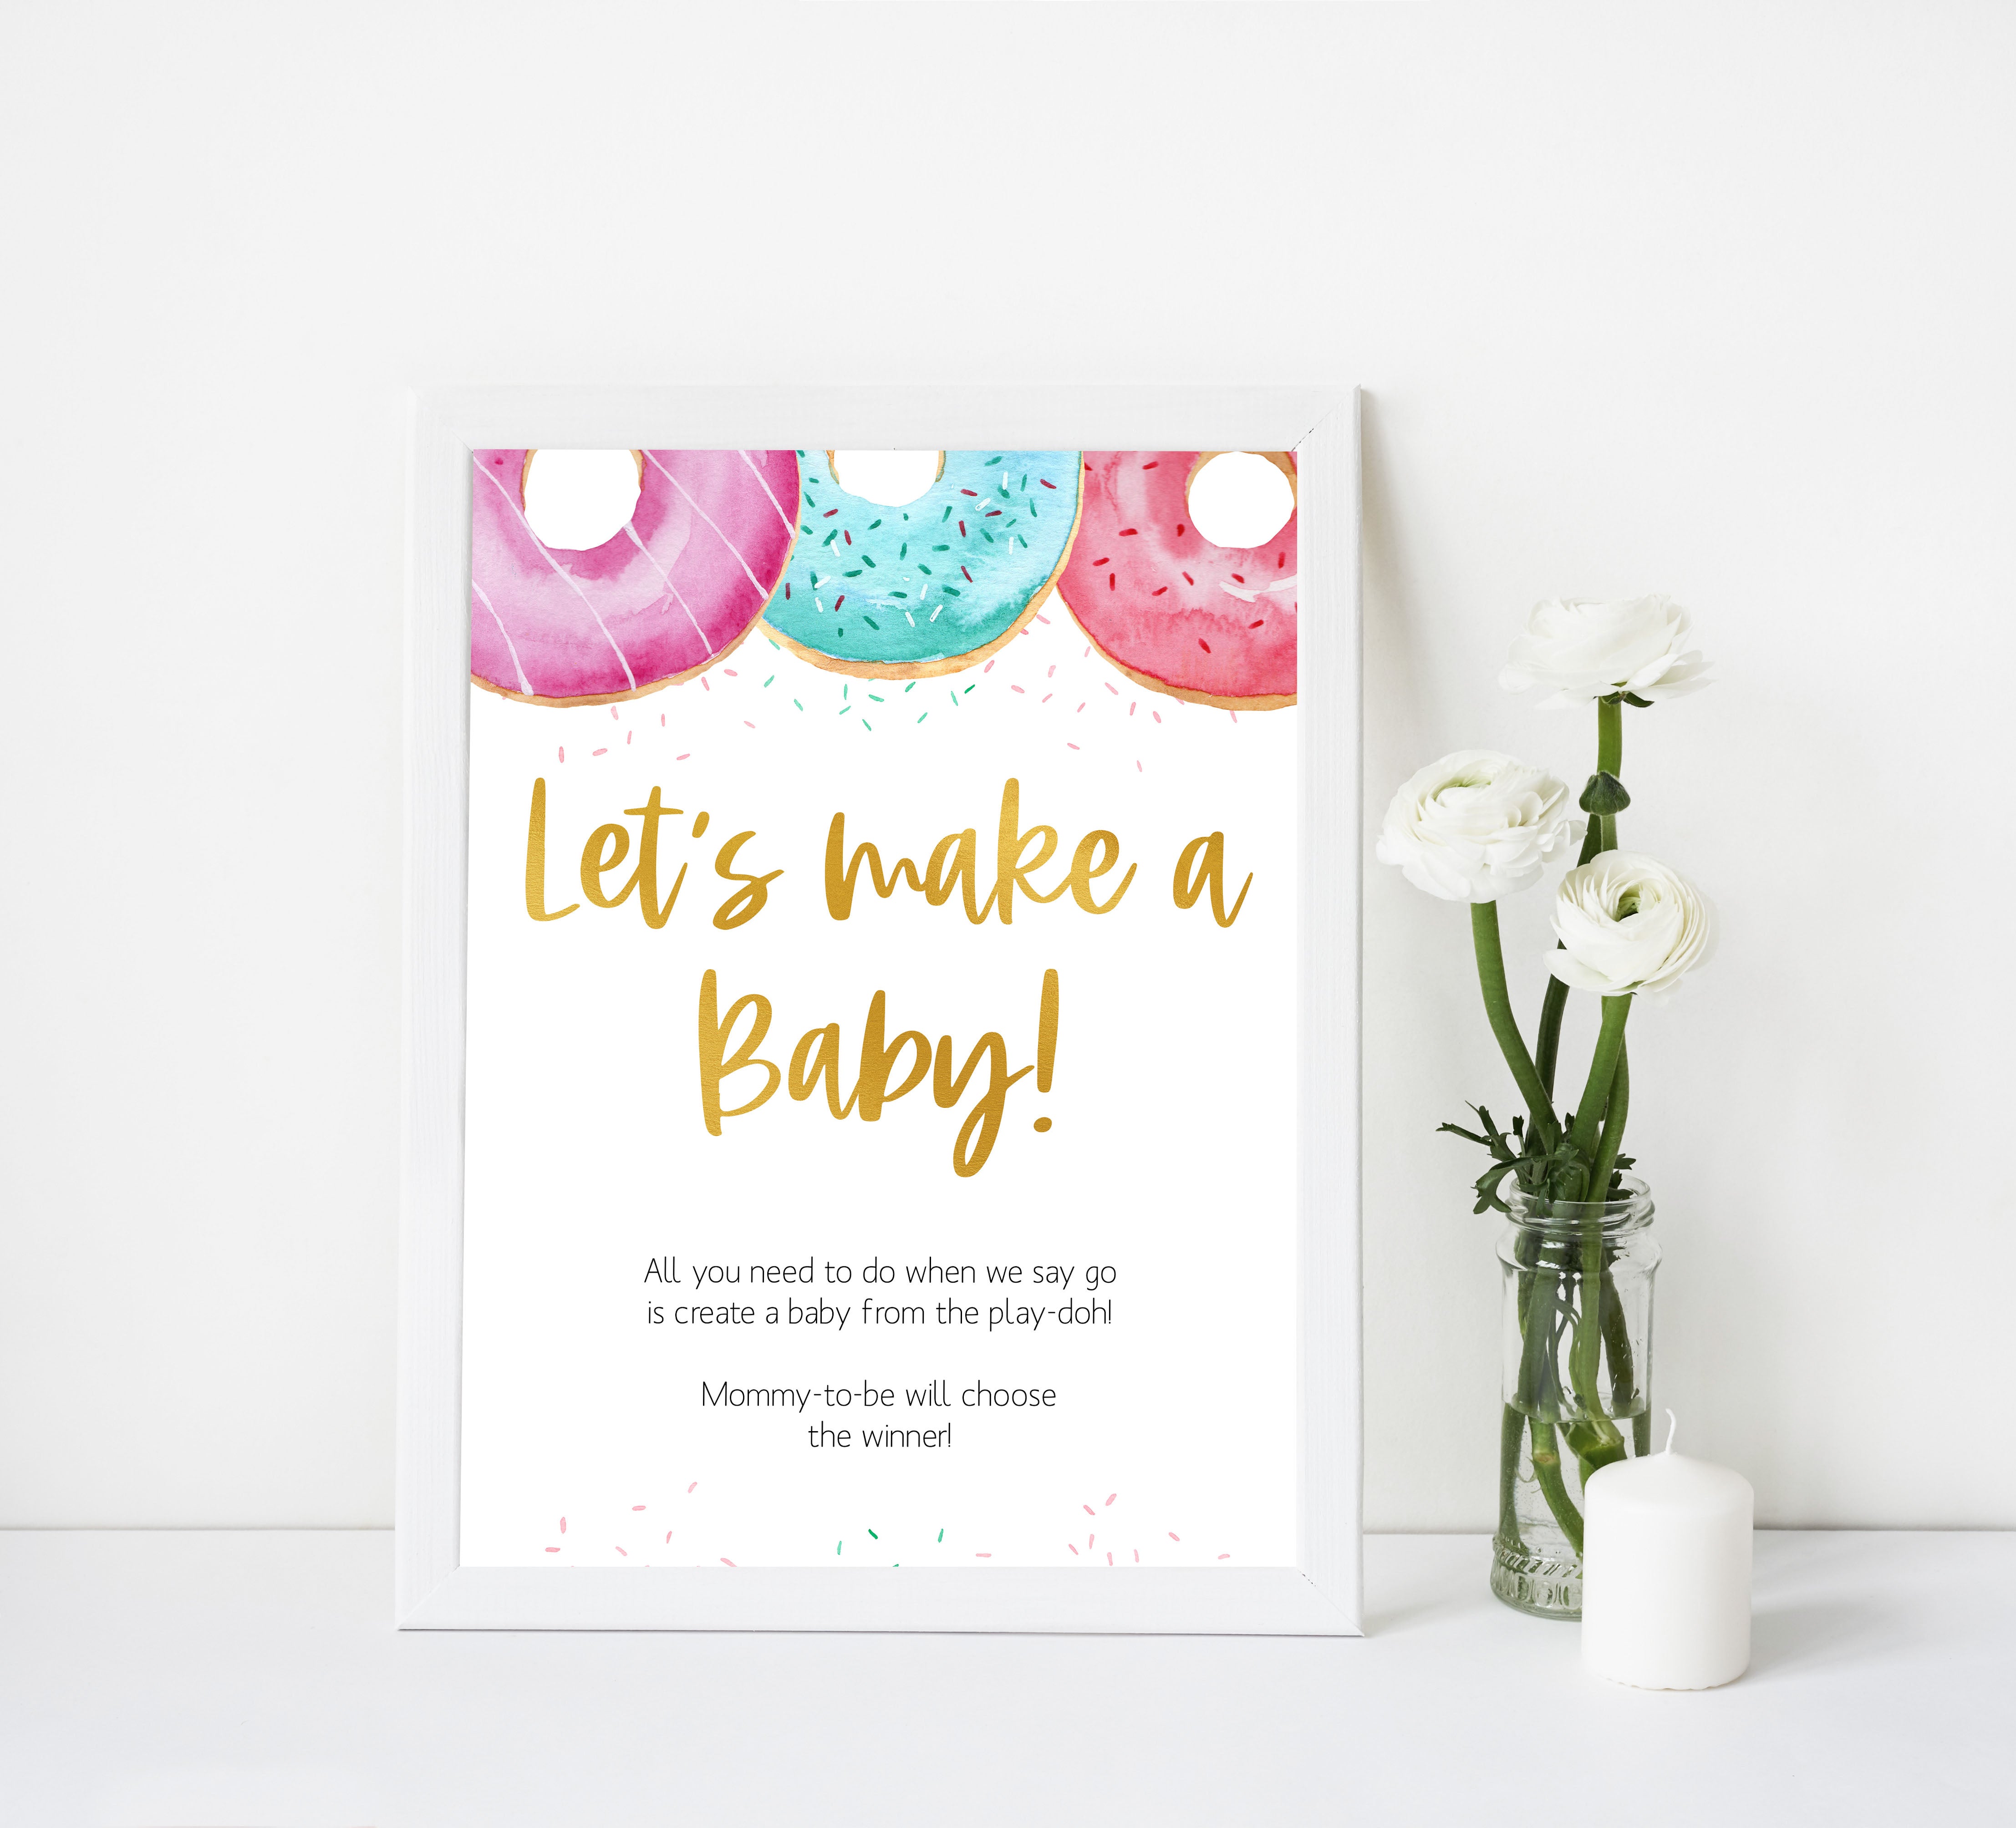 lets make a baby game, Printable baby shower games, donut baby games, baby shower games, fun baby shower ideas, top baby shower ideas, donut sprinkles baby shower, baby shower games, fun donut baby shower ideas